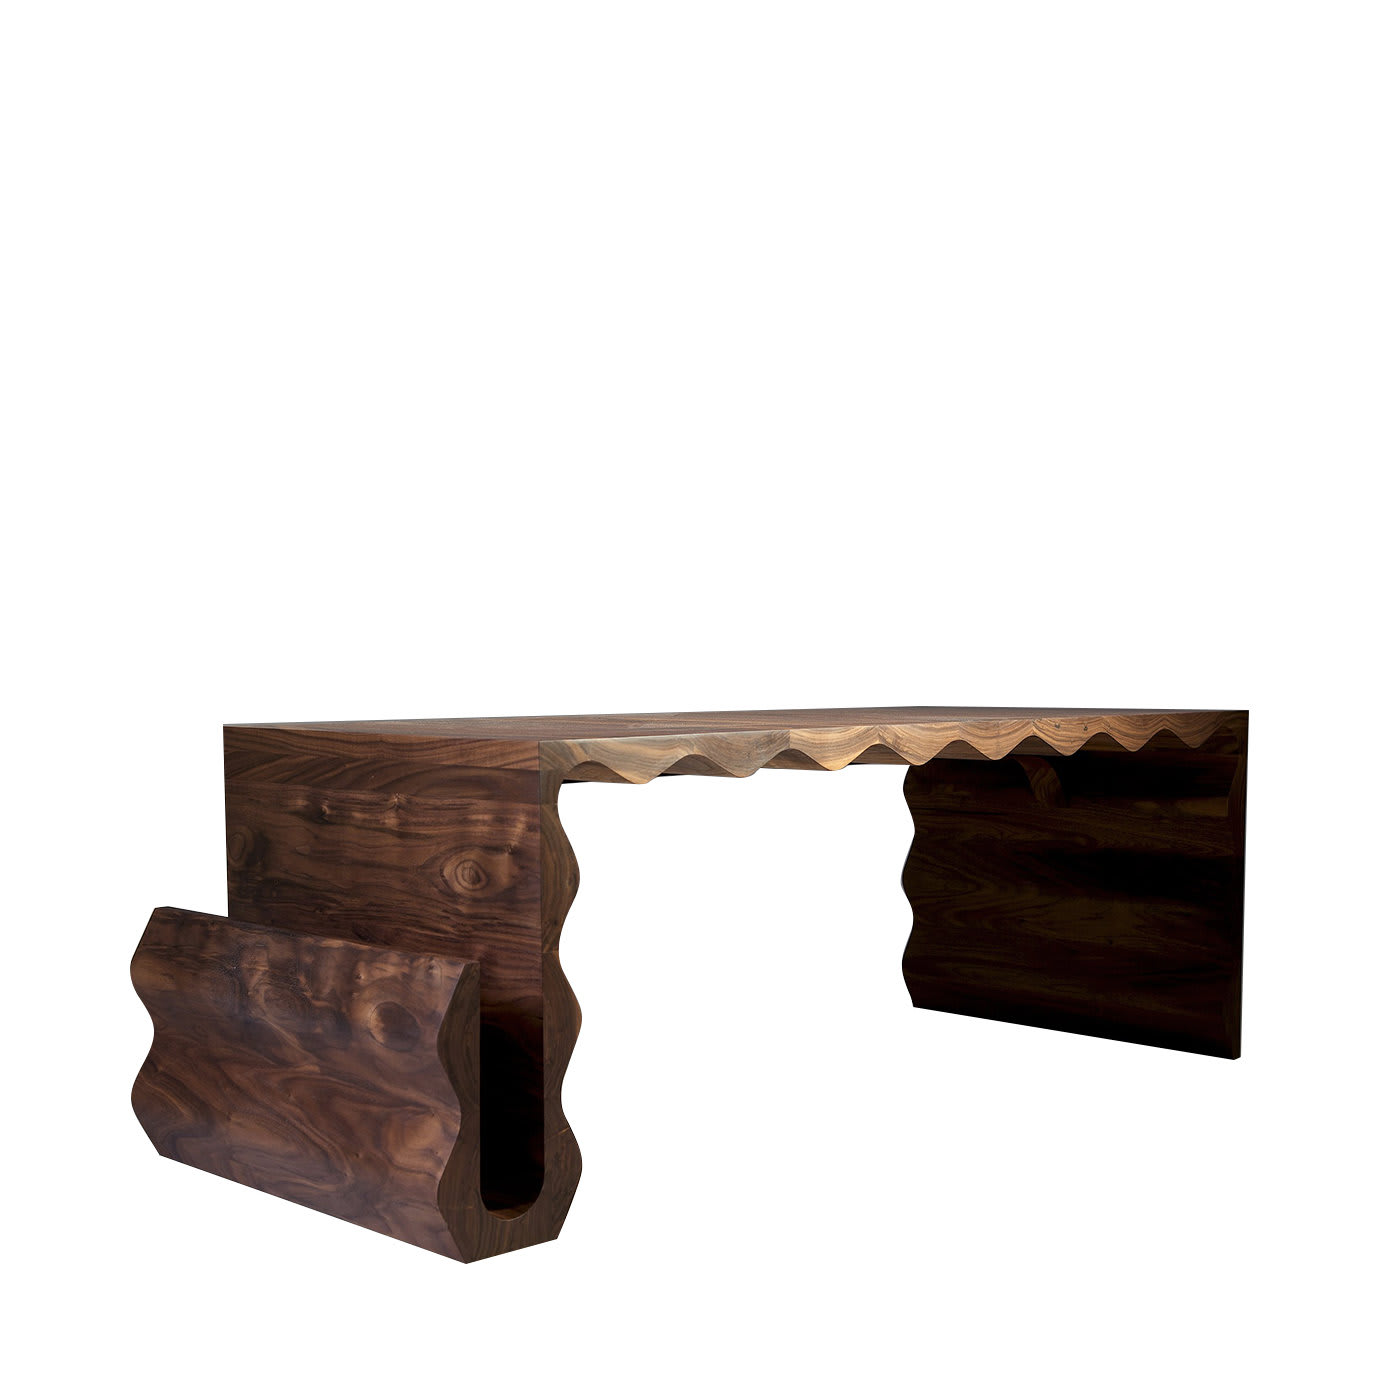 Optable Wood Coffee table by Mauro Dell'Orco - Faedo